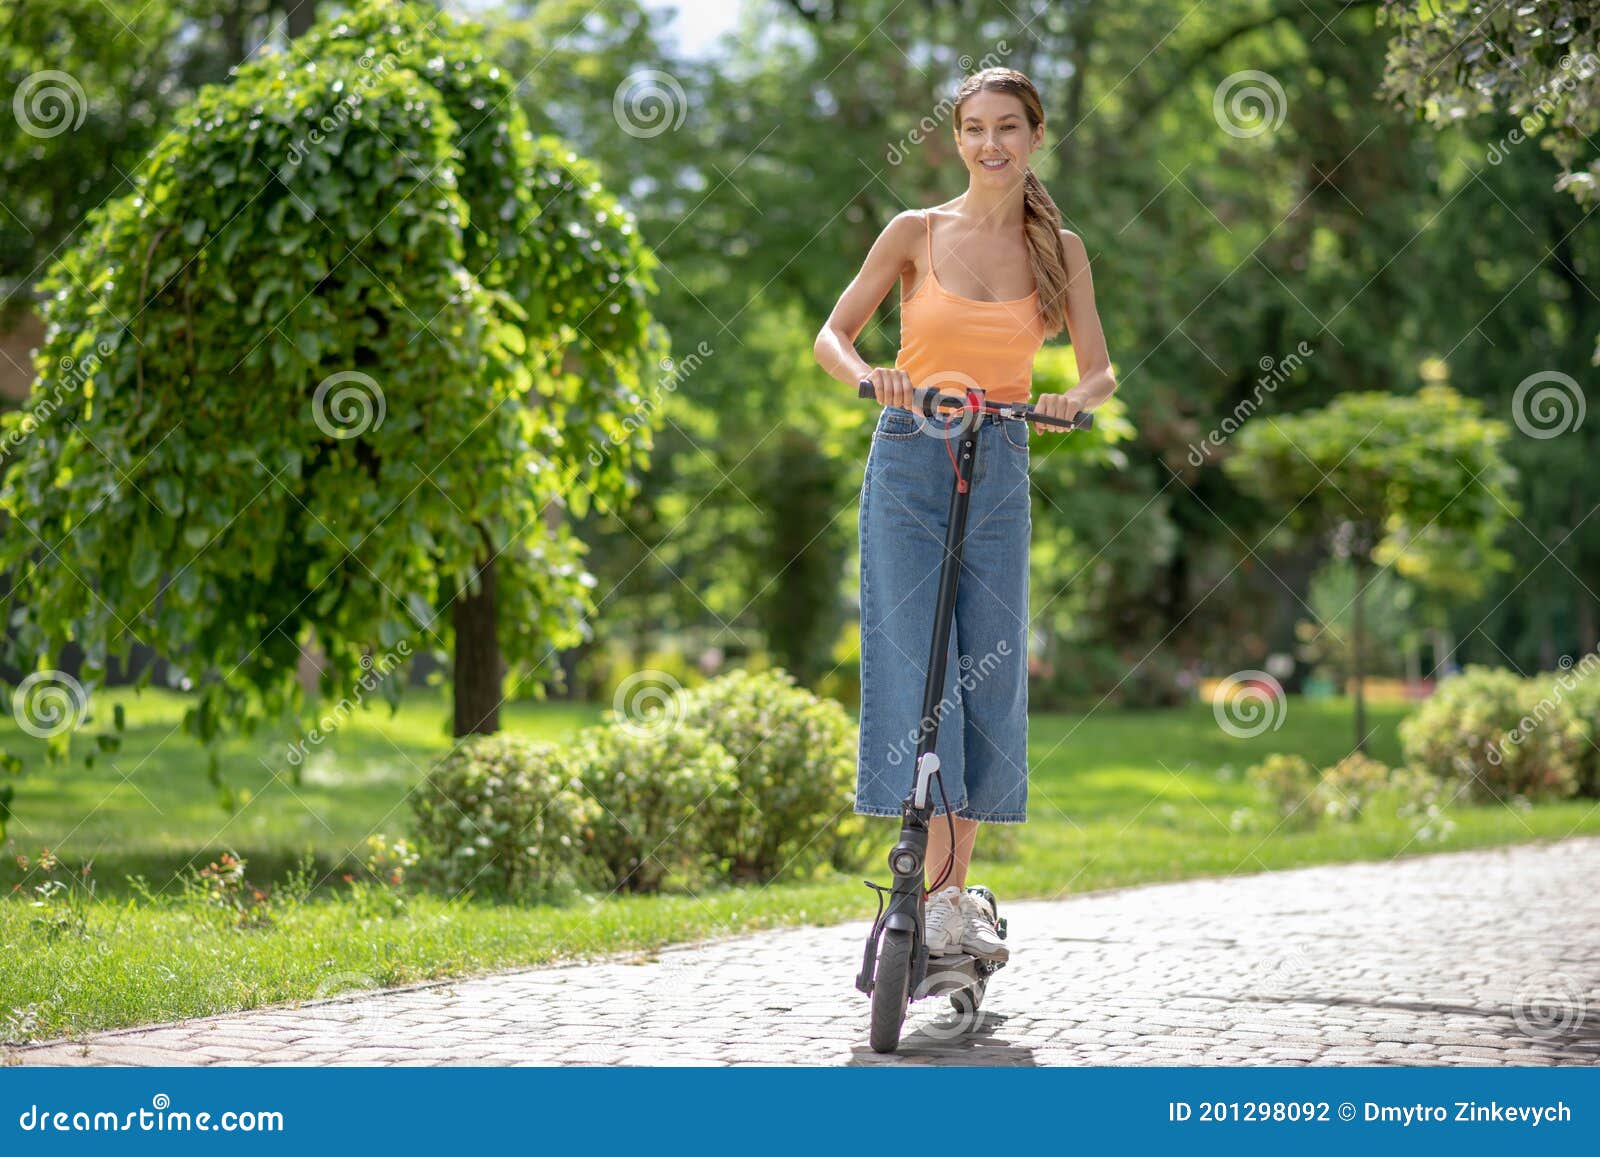 Long-haired Young Girl Riding a Scooter in the Park and Looking ...